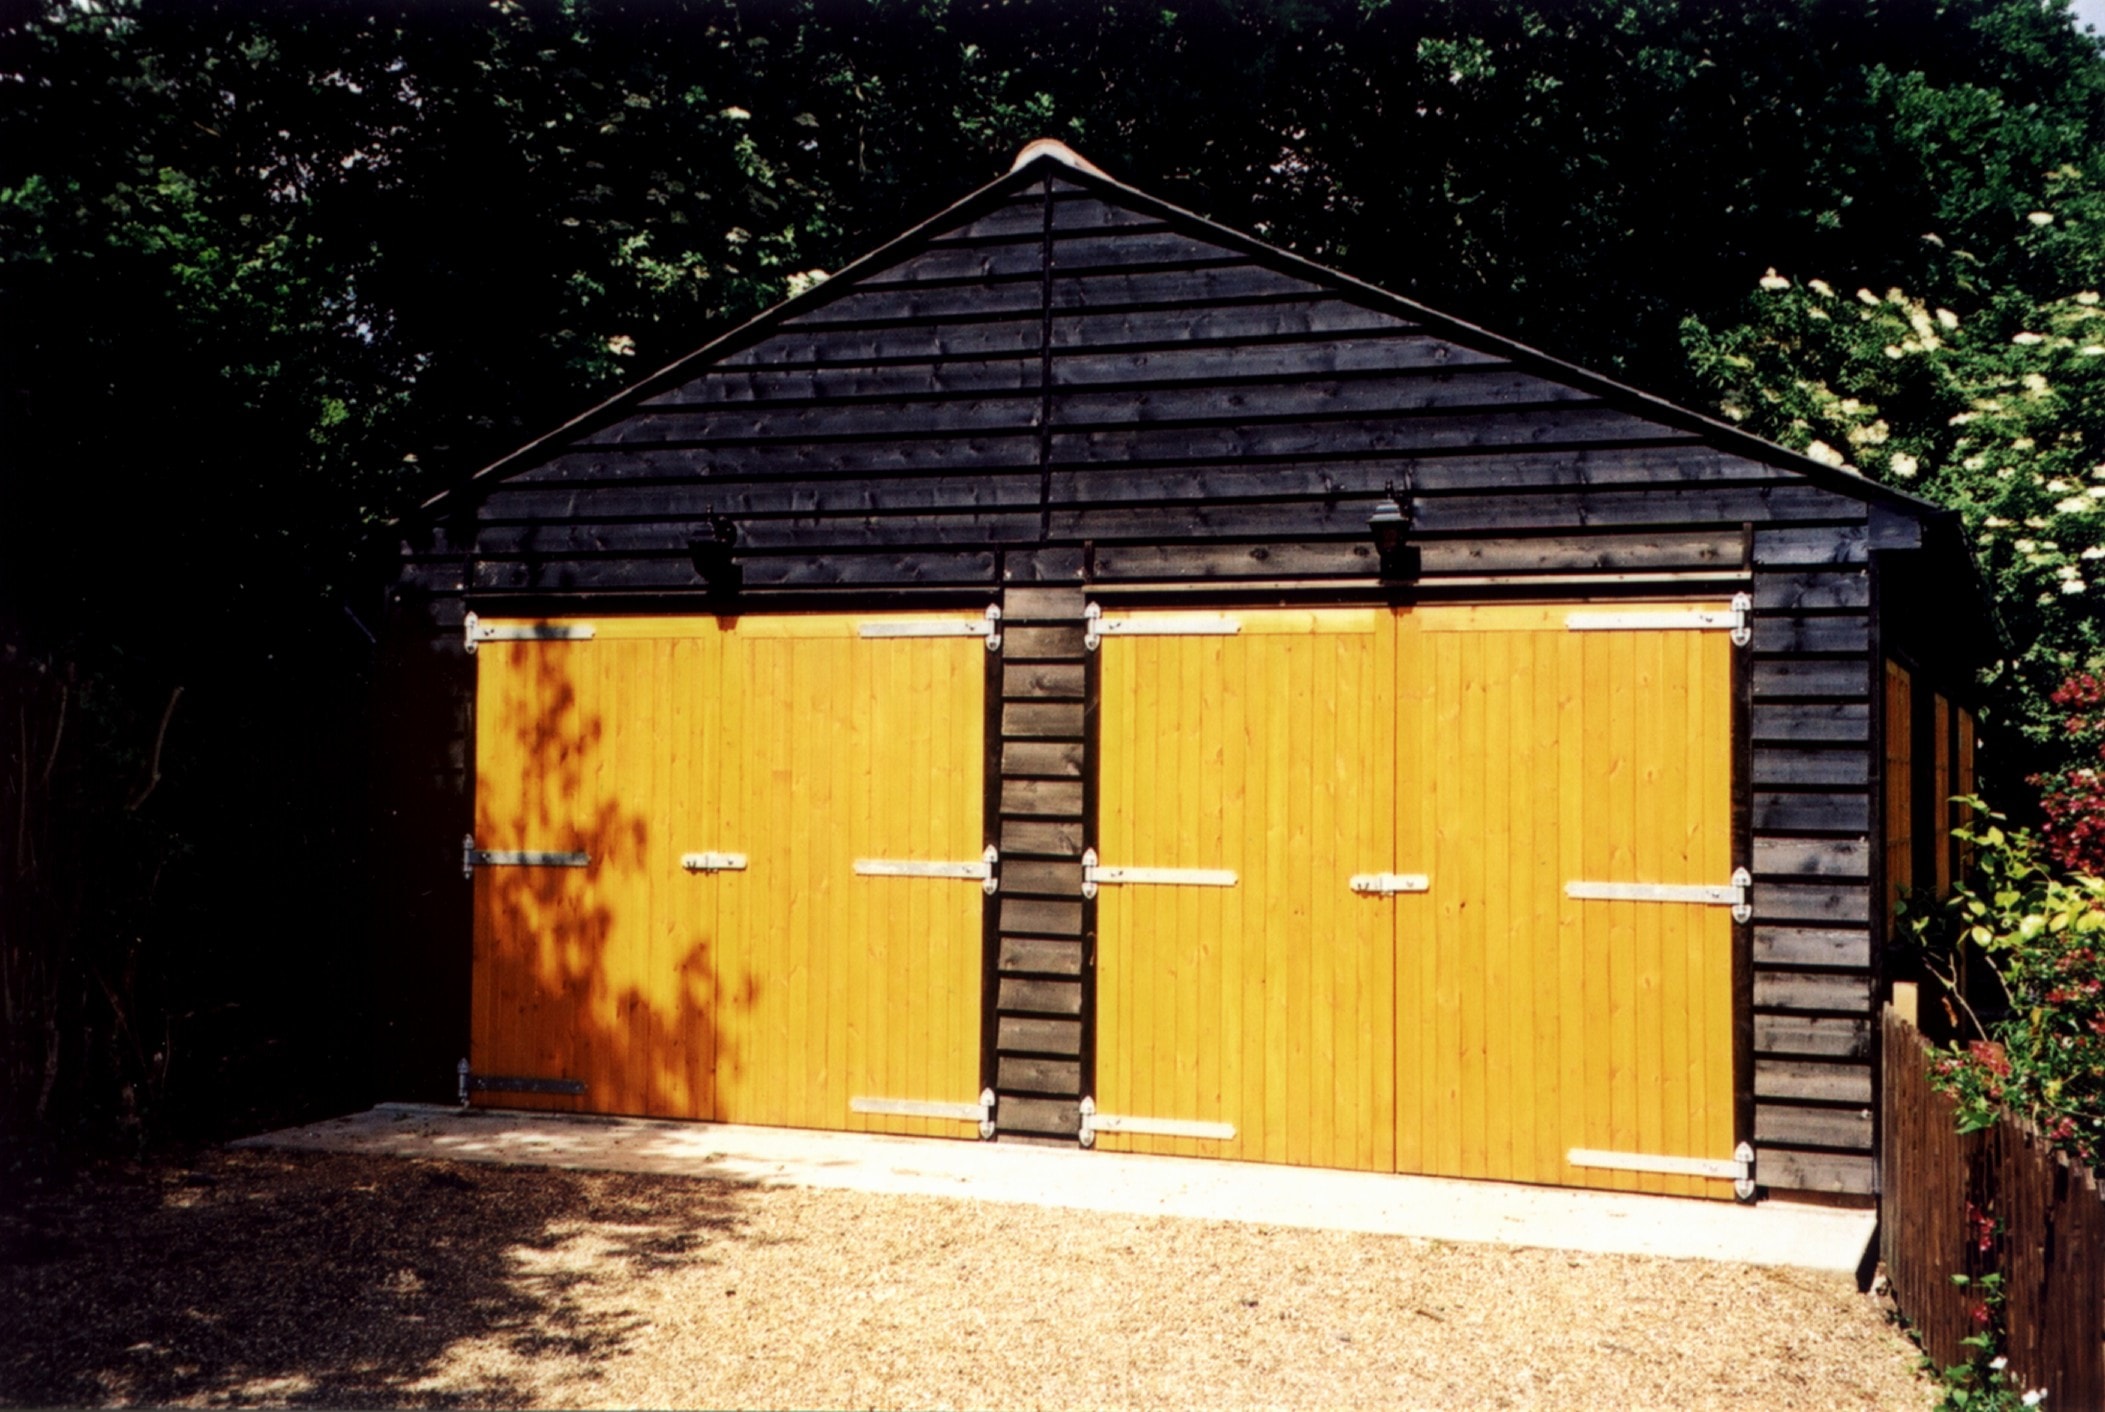 Click to enlarge image 176 misc double garage 60x60-min.jpg